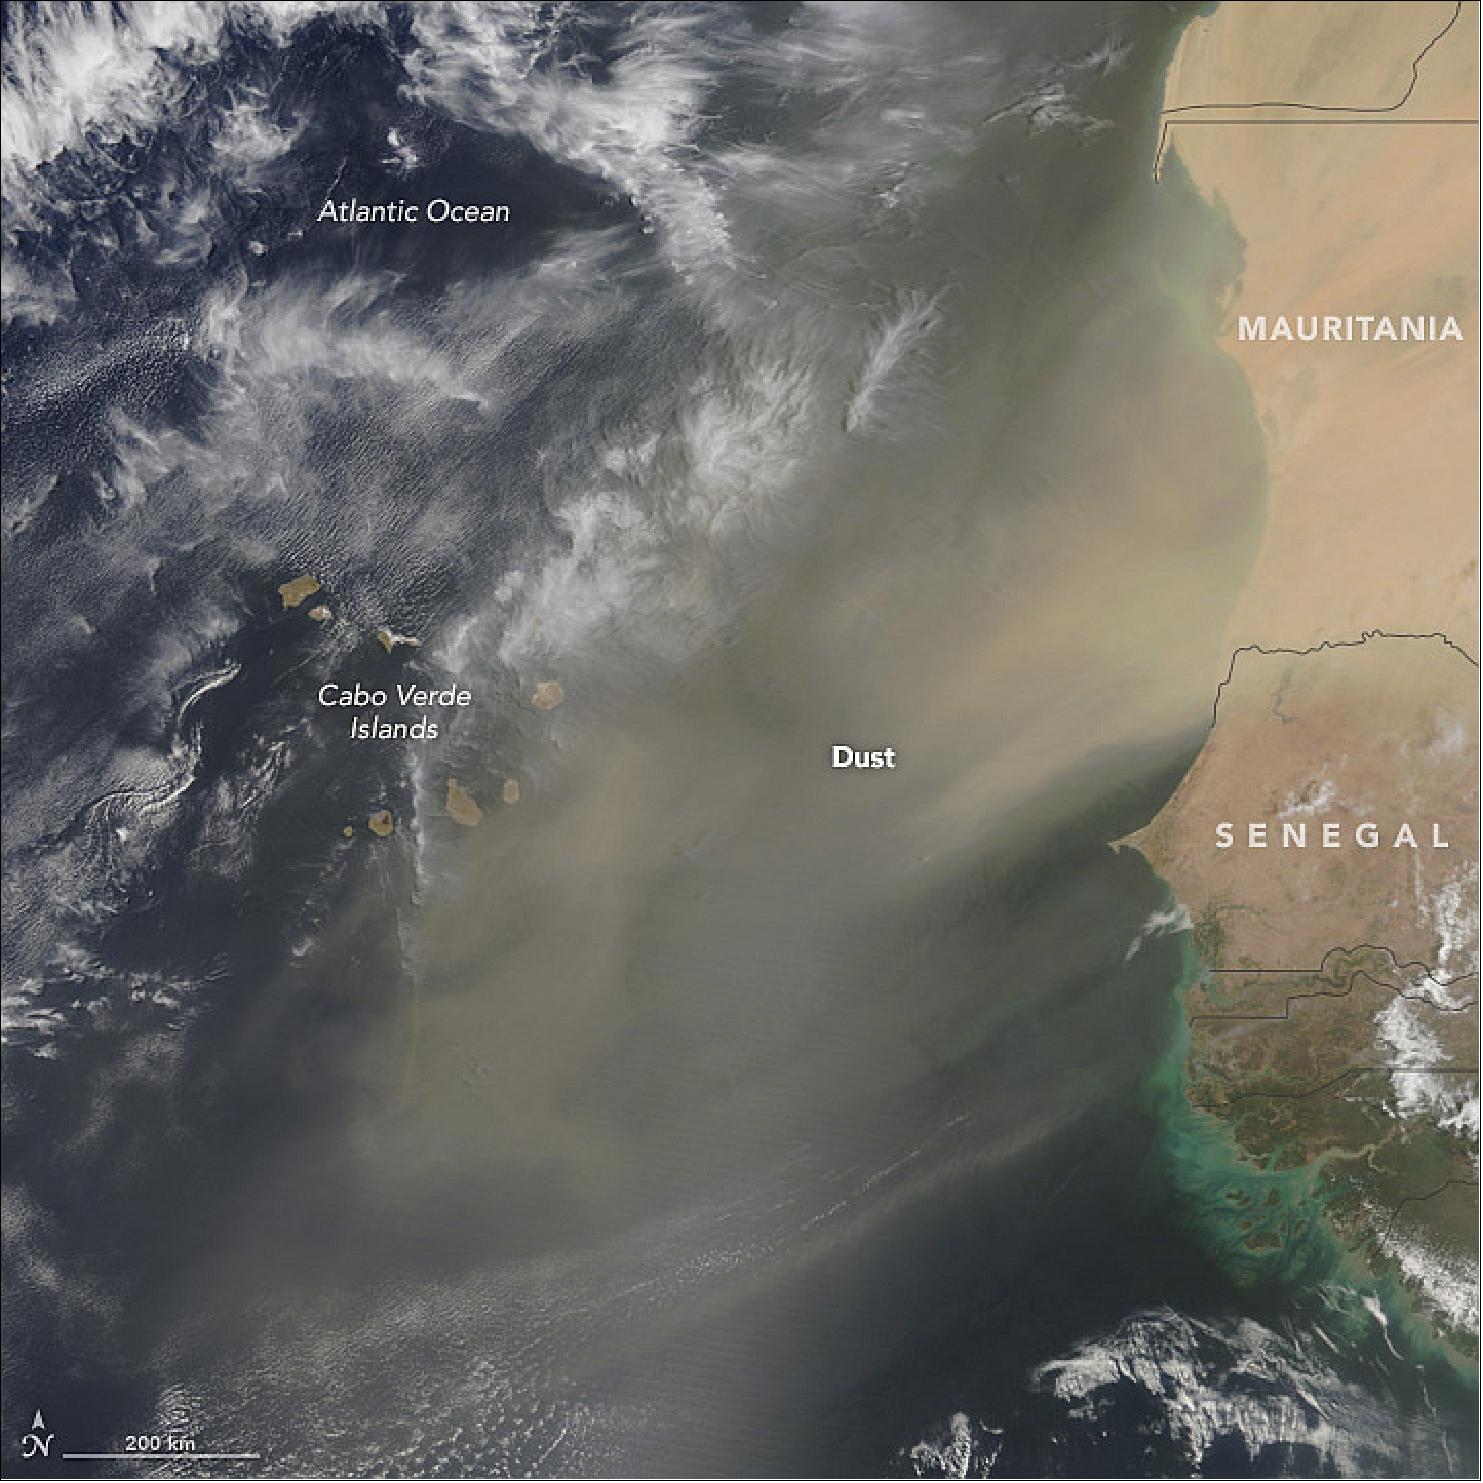 Figure 68: A dust storm over western Africa acquired by MODIS on May 9, 2017 (image credit: NASA Earth Observatory, image by Jeff Schmaltz)